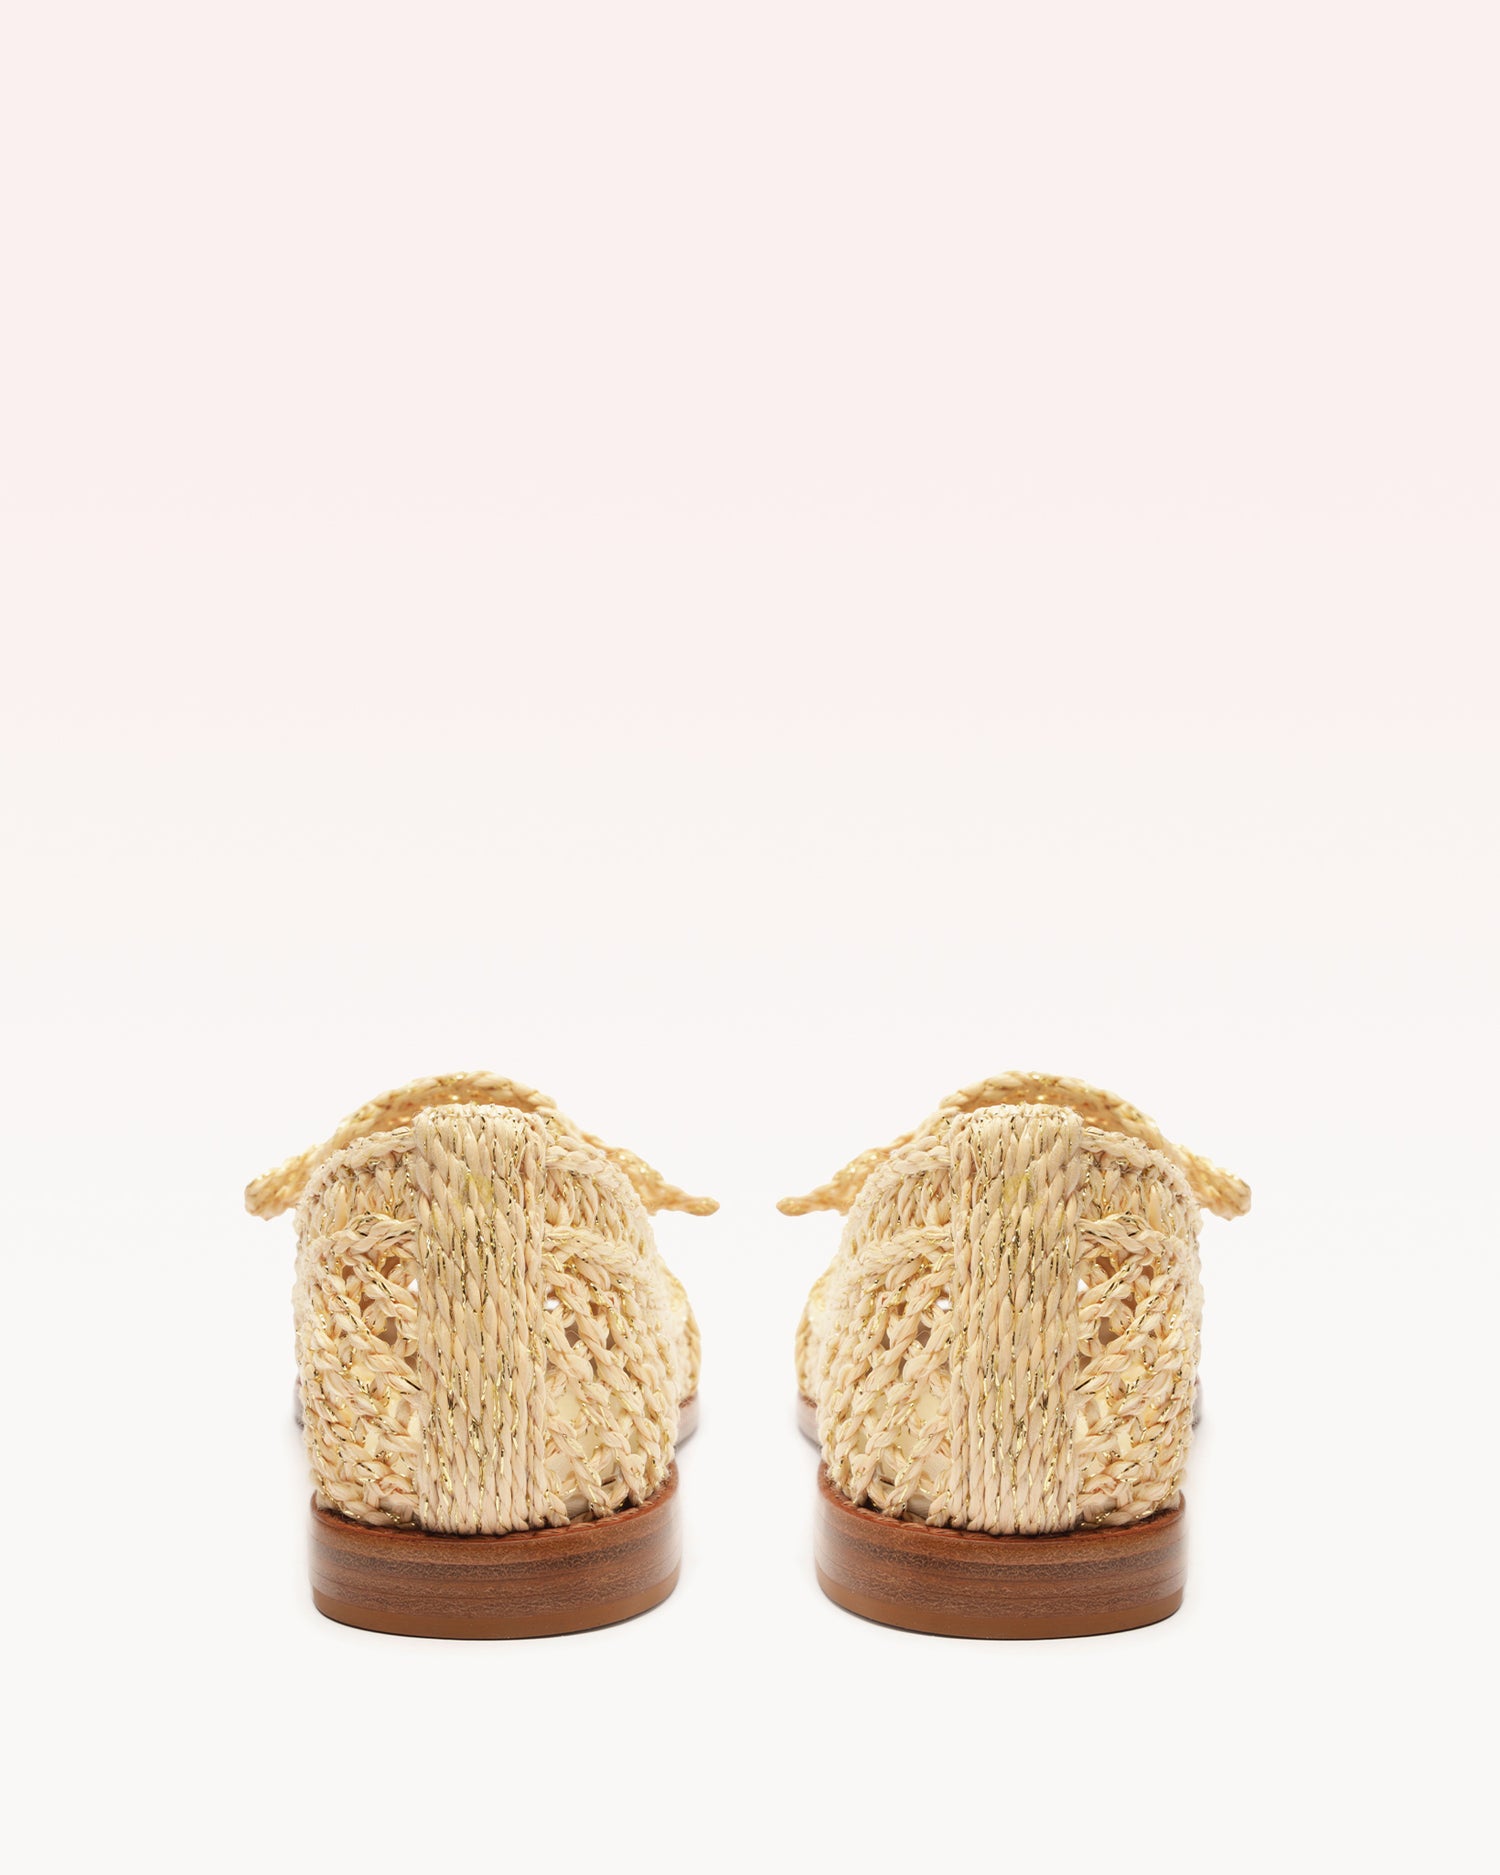 Raffia Penny Loafer Pearl Loafers S/24   